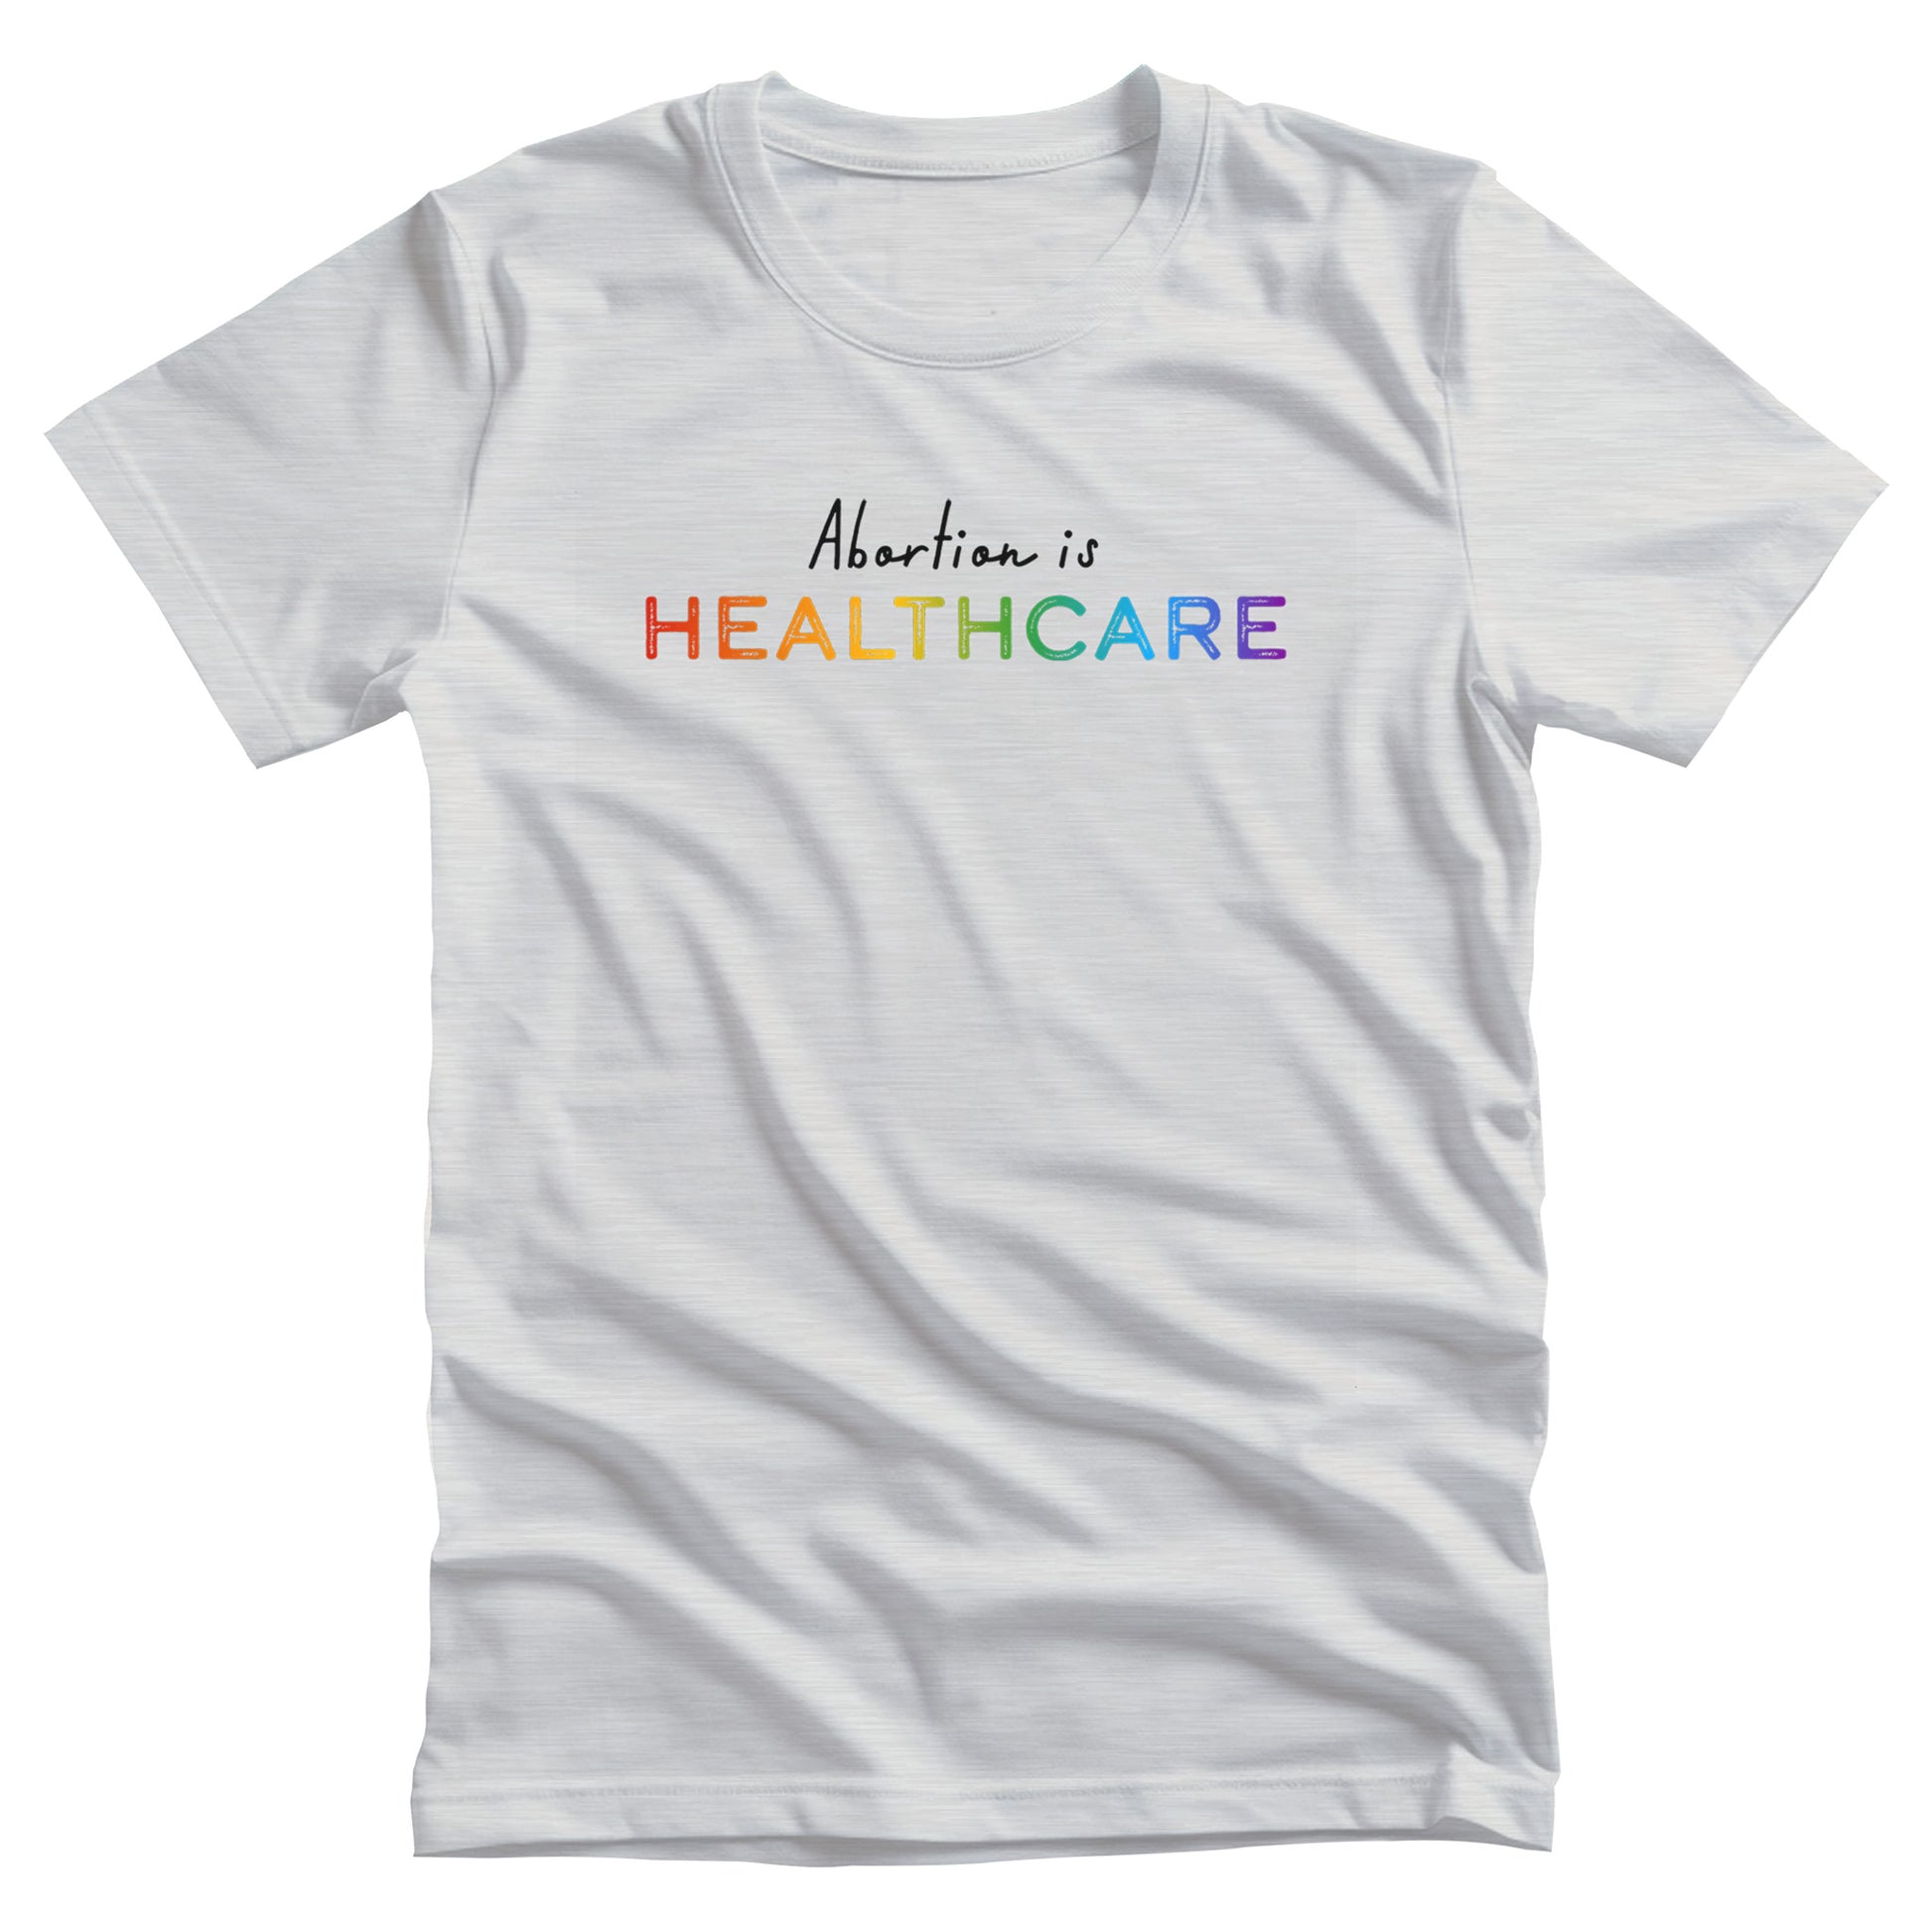 Ash color unisex t-shirt that says, “Abortion is Healthcare.” The words “Abortion is” is in a script font, and “Healthcare” is in all caps in a rainbow gradient color.